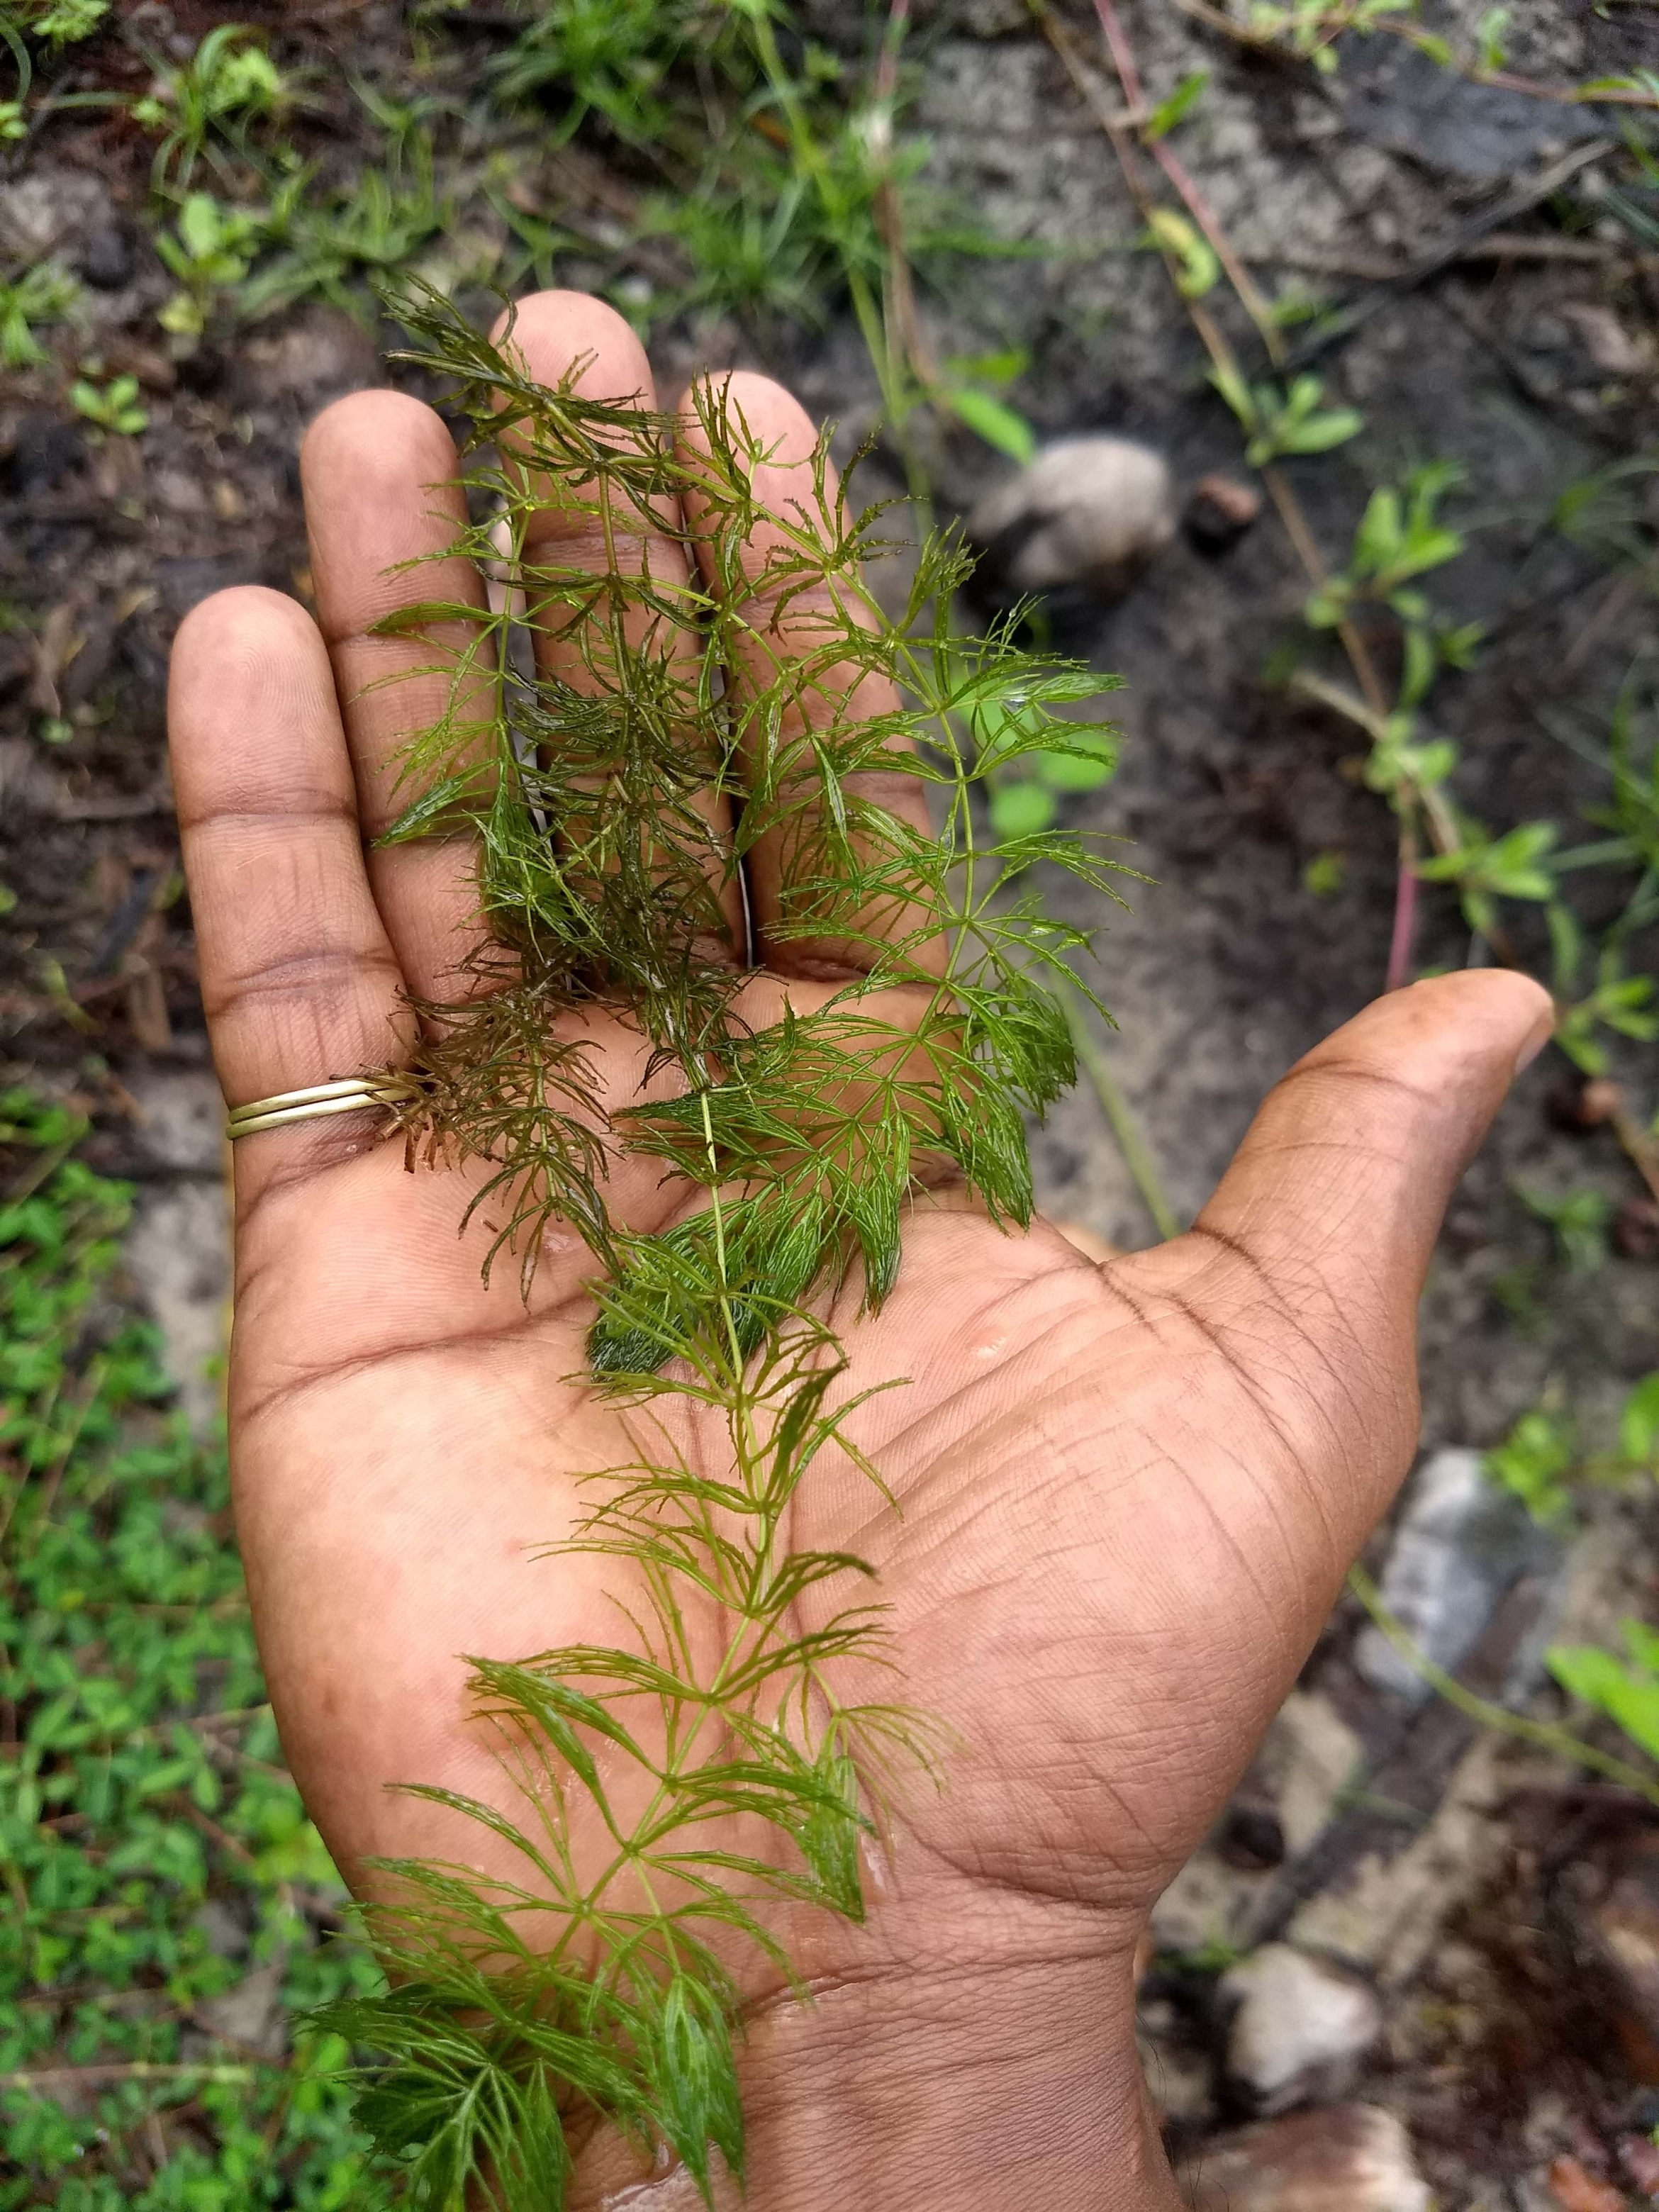 a hand holding a clipping of aquatic vegetation